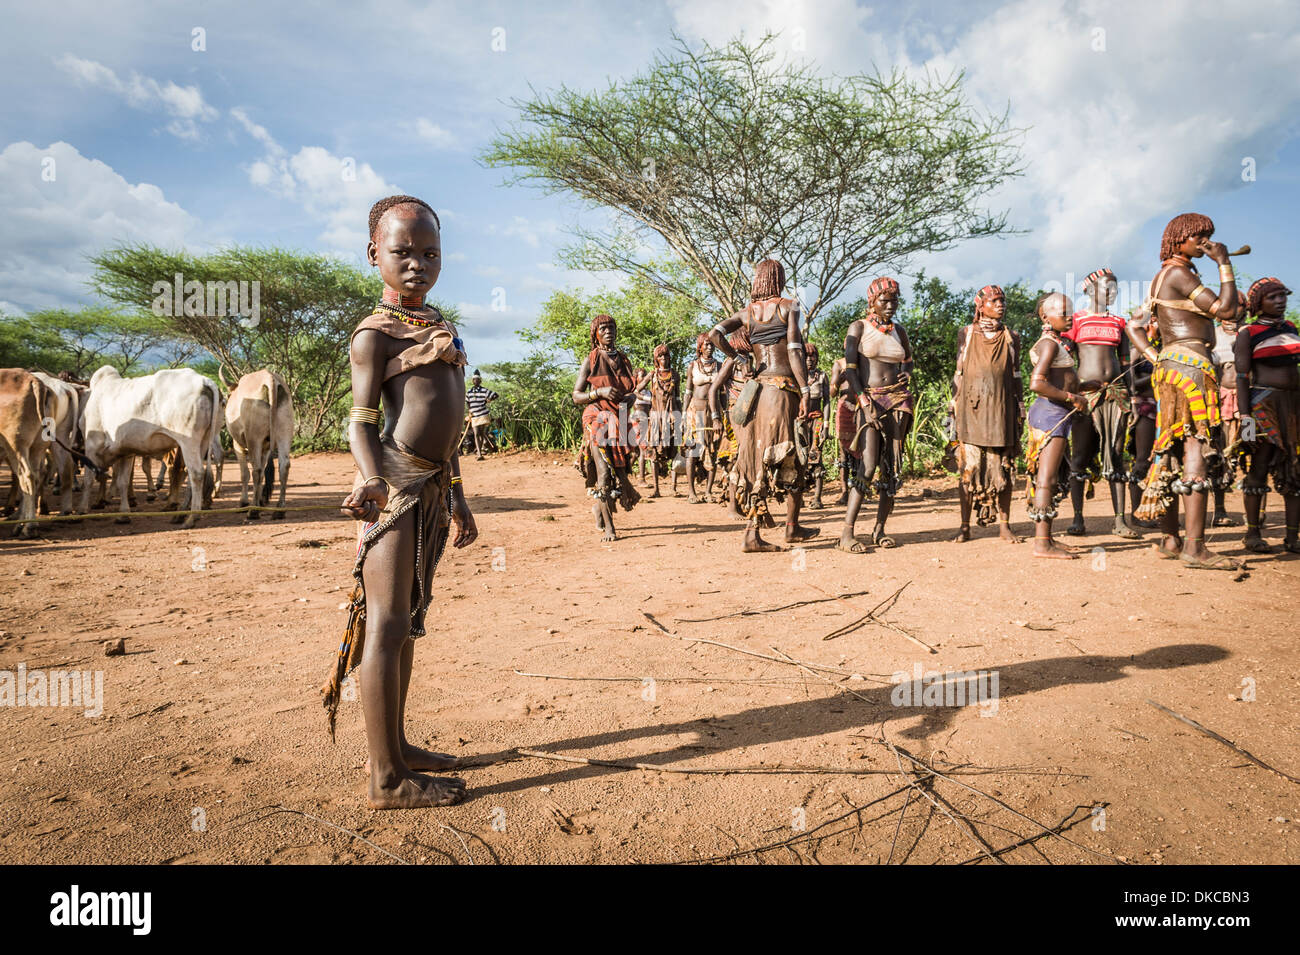 Women dancing around the cattle during a bull jumping ceremony. A rite of passage from boys to men. Hamer tribe, Omo valley, Ethiopia Stock Photo